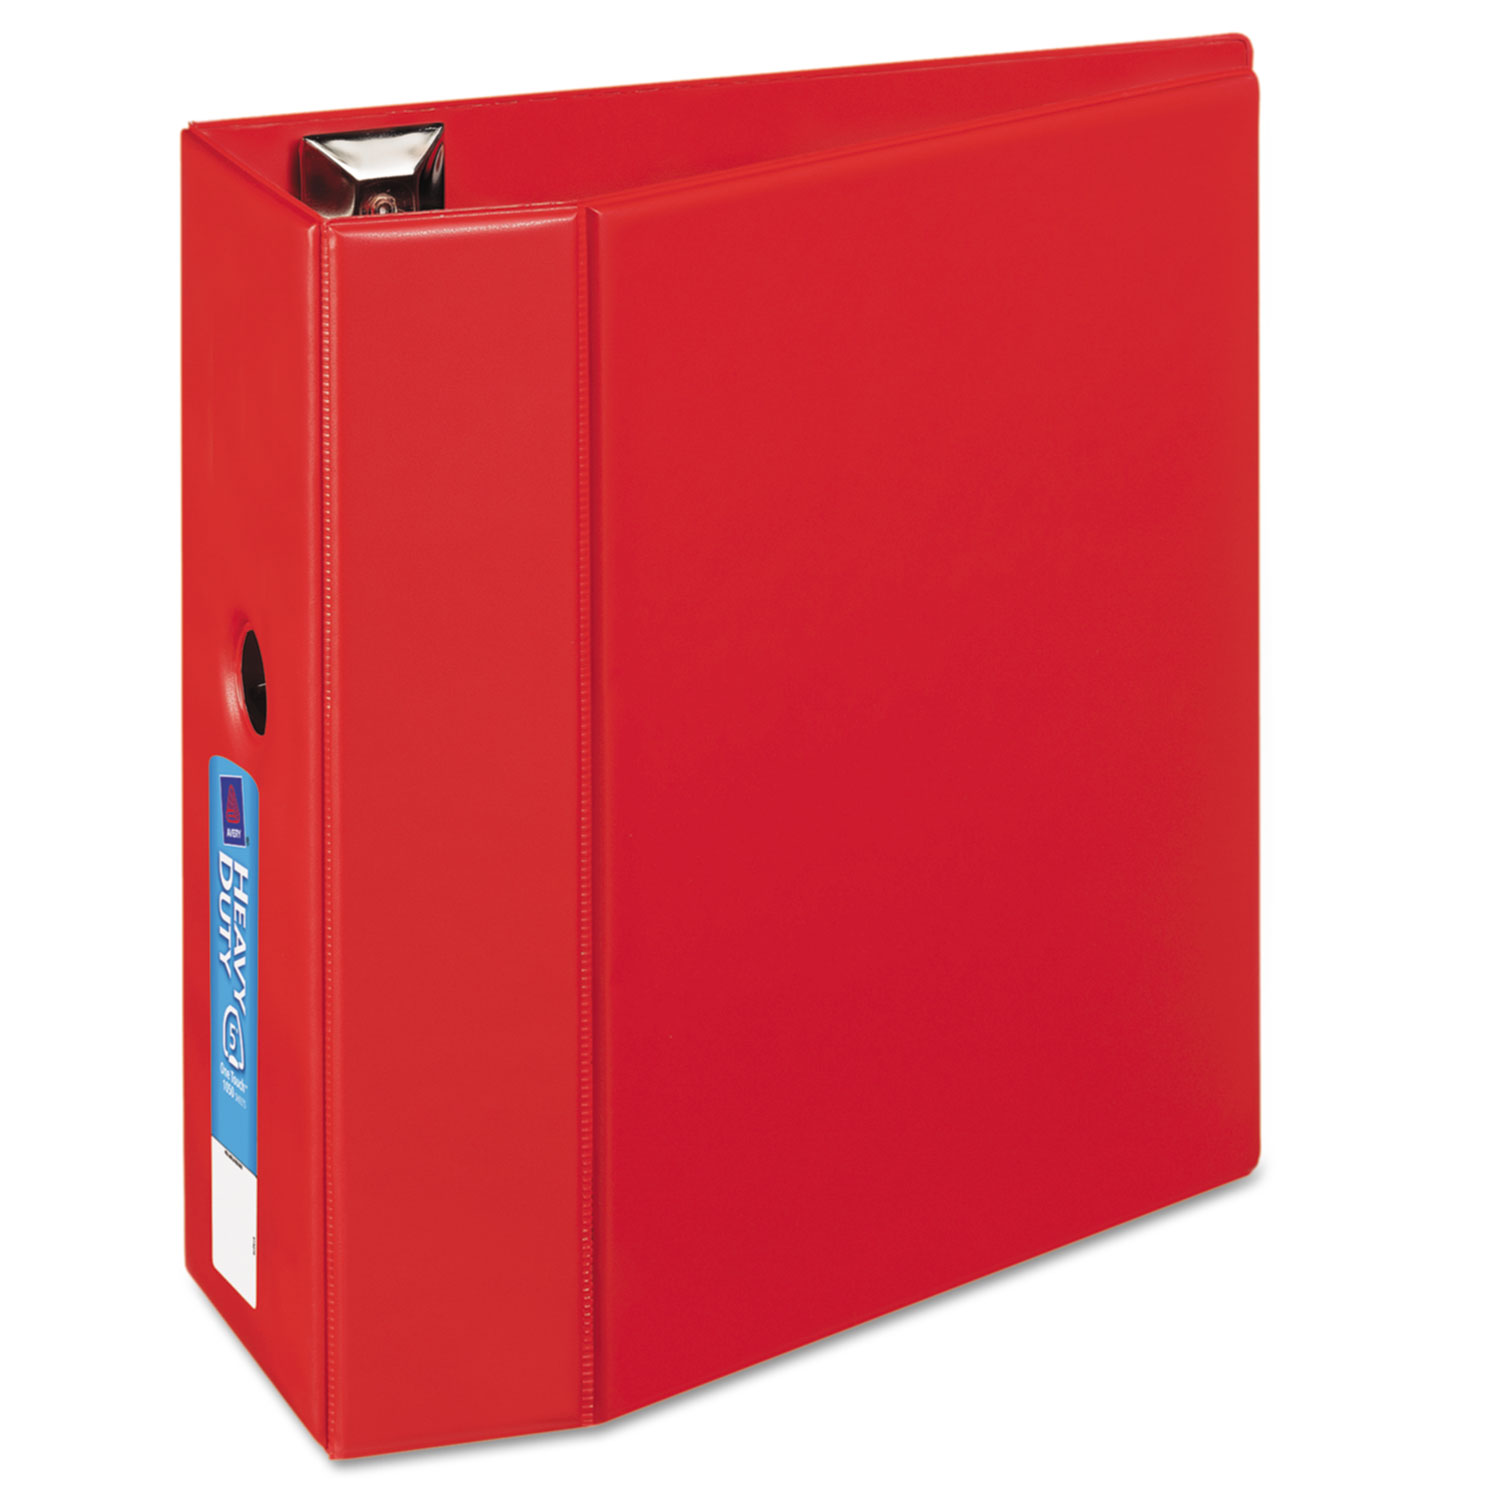  Avery 79586 Heavy-Duty Non-View Binder with DuraHinge and Locking One Touch EZD Rings, 3 Rings, 5 Capacity, 11 x 8.5, Red (AVE79586) 